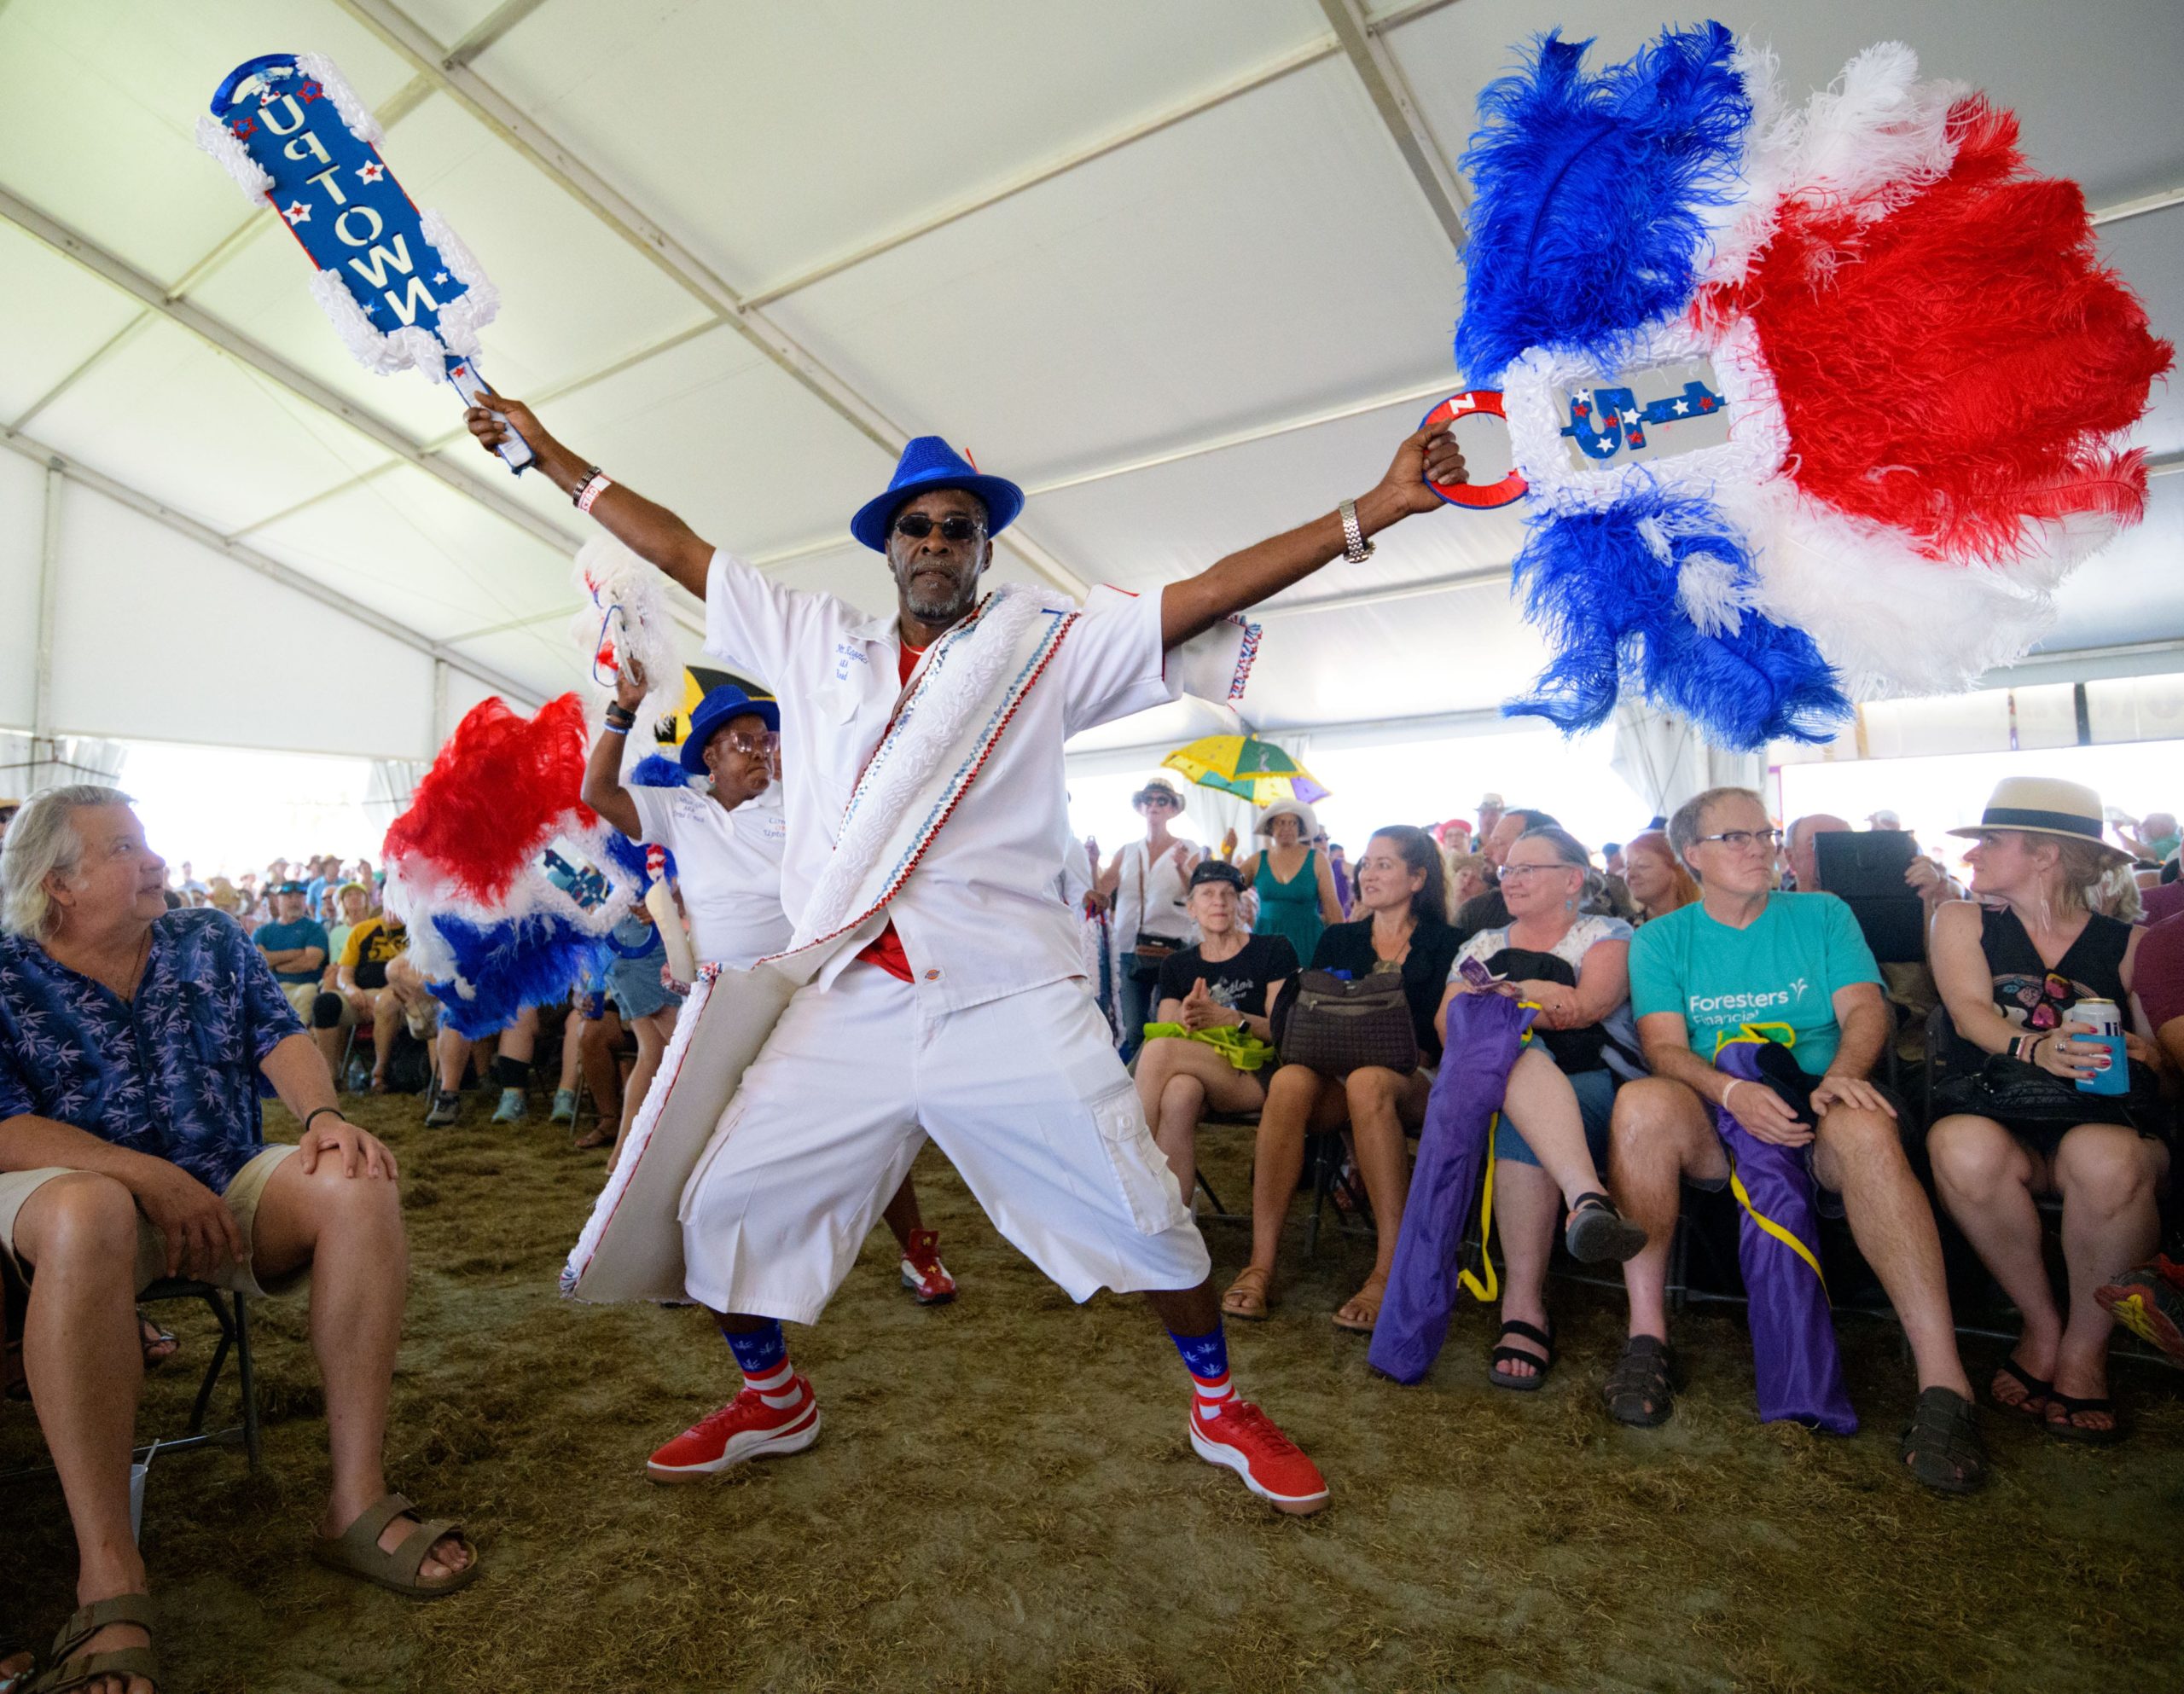 The Uptown Swingers dance to the music of the Treme Brass Band in the Economy Hall Tent during the 50th New Orleans Jazz and Heritage Festival at the Fair Grounds in New Orleans, La. Sunday, April 28, 2019. Photo by Matthew Hinton